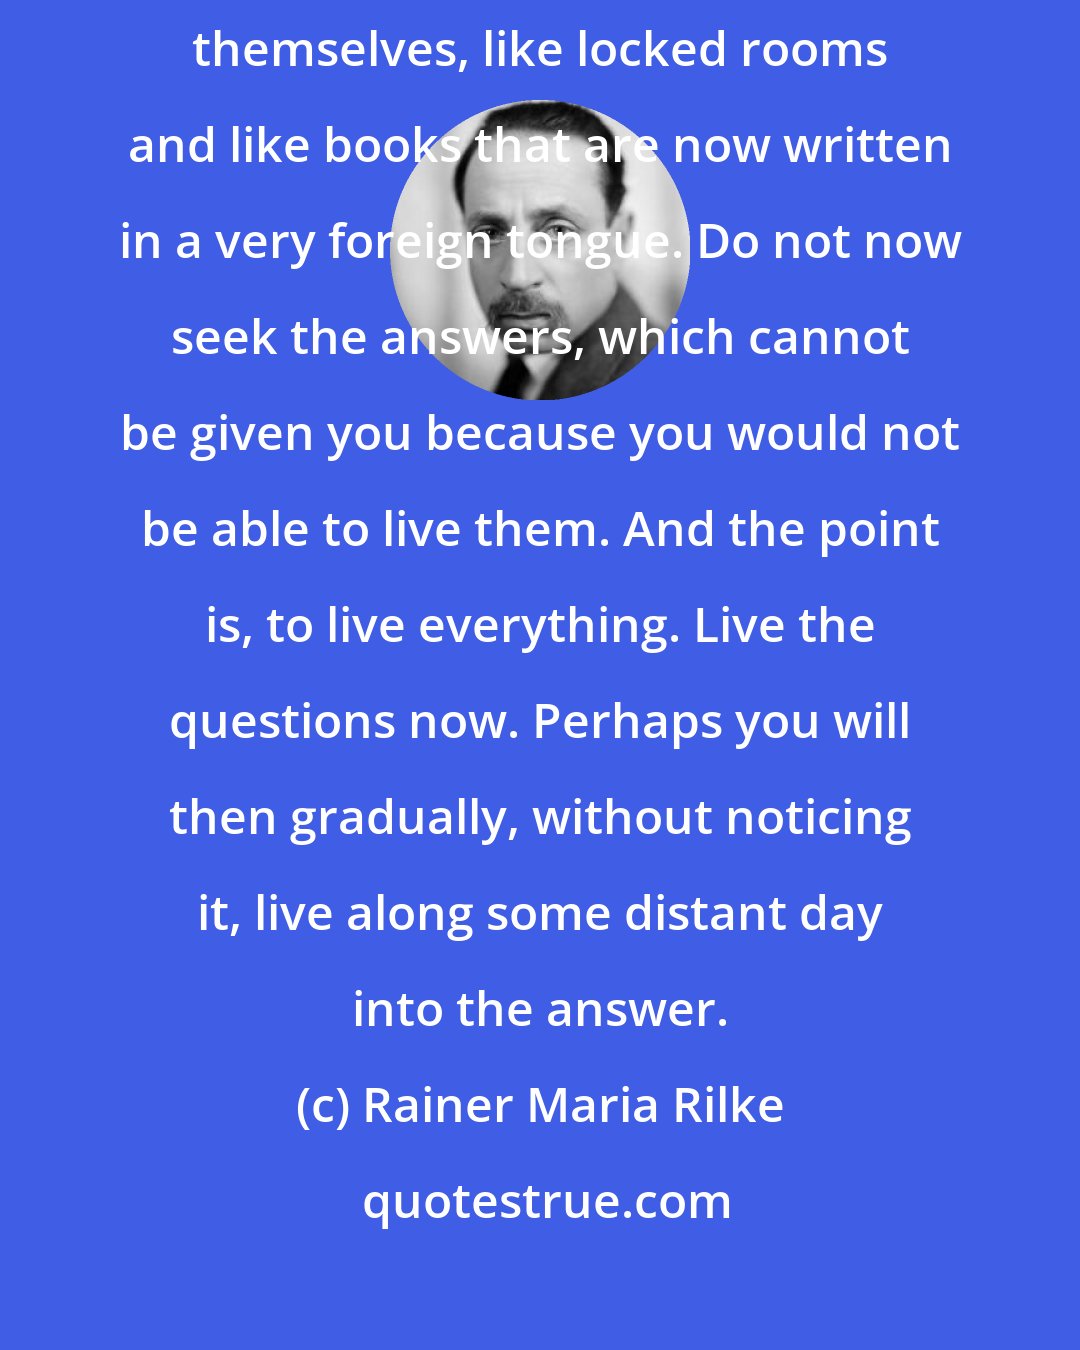 Rainer Maria Rilke: Be patient toward all that is unsolved in your heart and try to love the questions themselves, like locked rooms and like books that are now written in a very foreign tongue. Do not now seek the answers, which cannot be given you because you would not be able to live them. And the point is, to live everything. Live the questions now. Perhaps you will then gradually, without noticing it, live along some distant day into the answer.